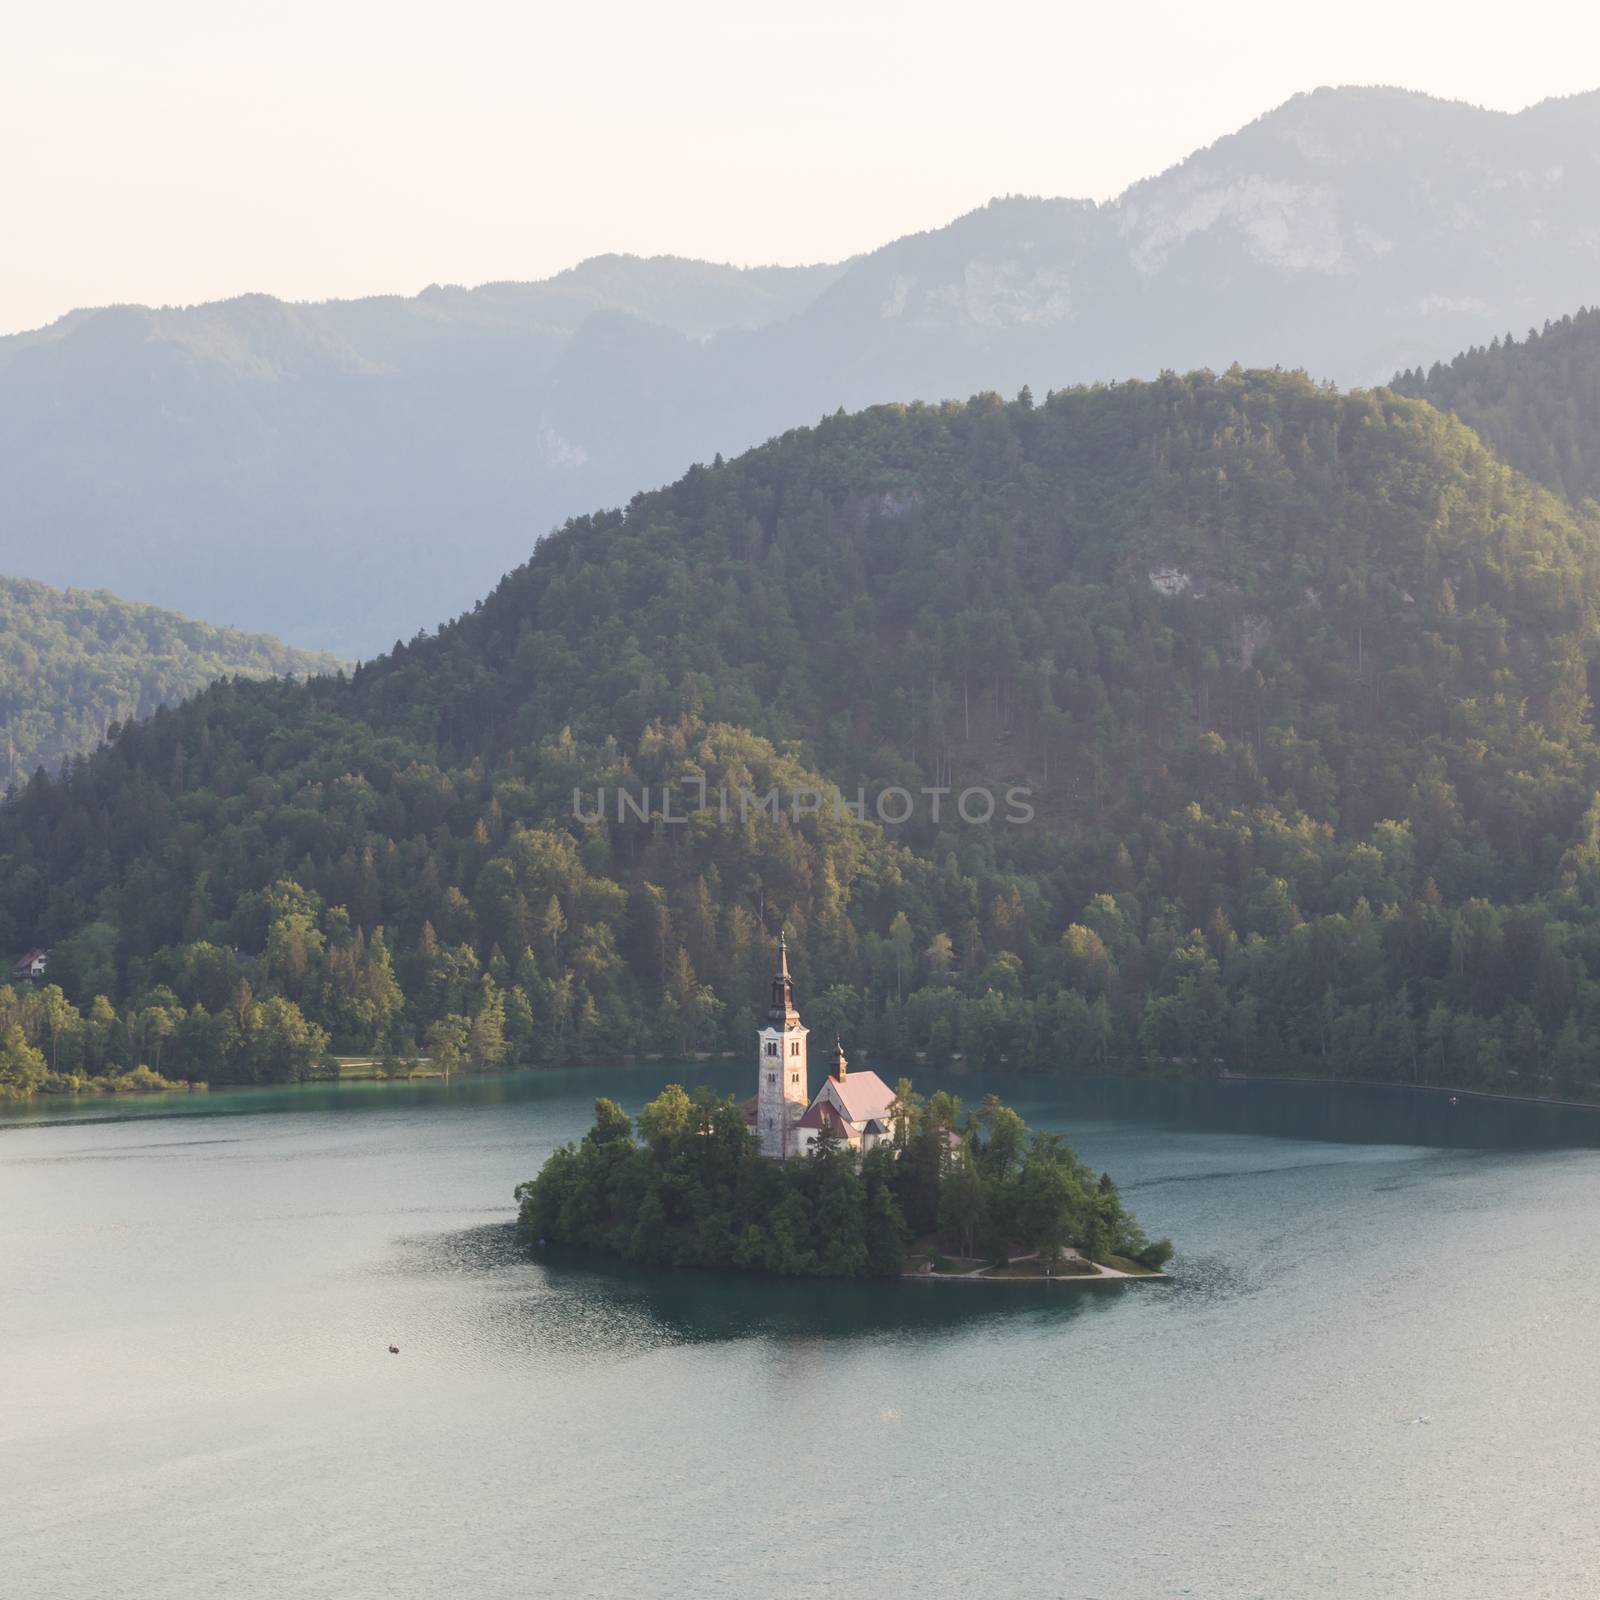 Lake Bled, island with a church and the alps in the background, Slovenia.